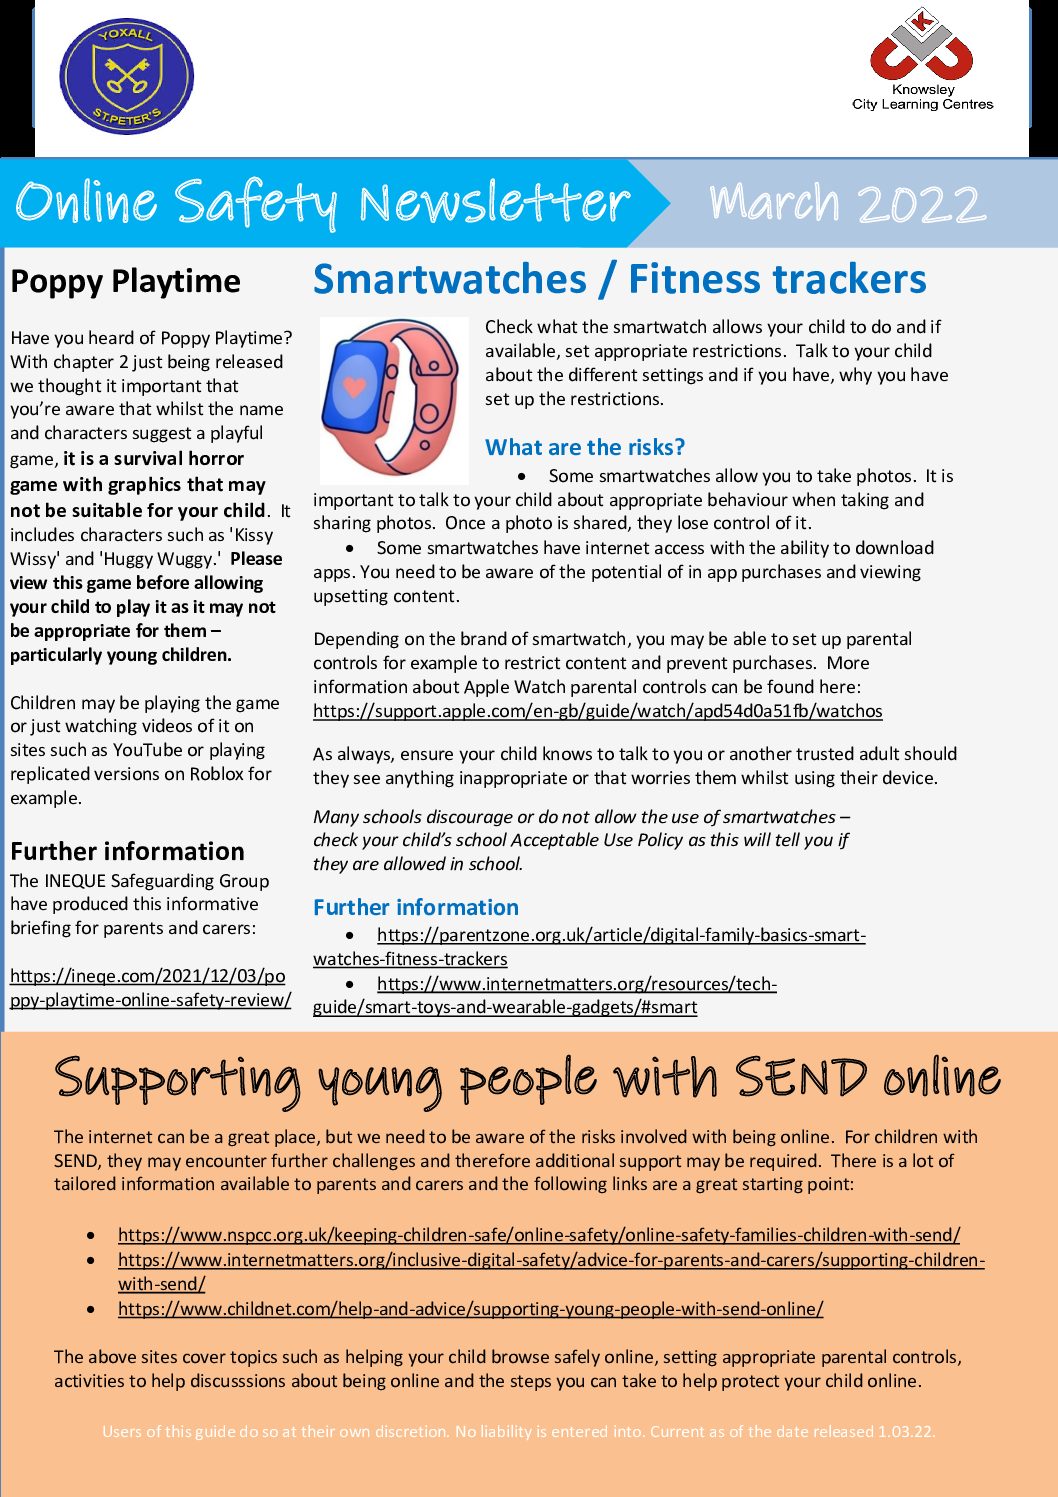 Poppy Playtime: Online Safety Review - Ineqe Safeguarding Group